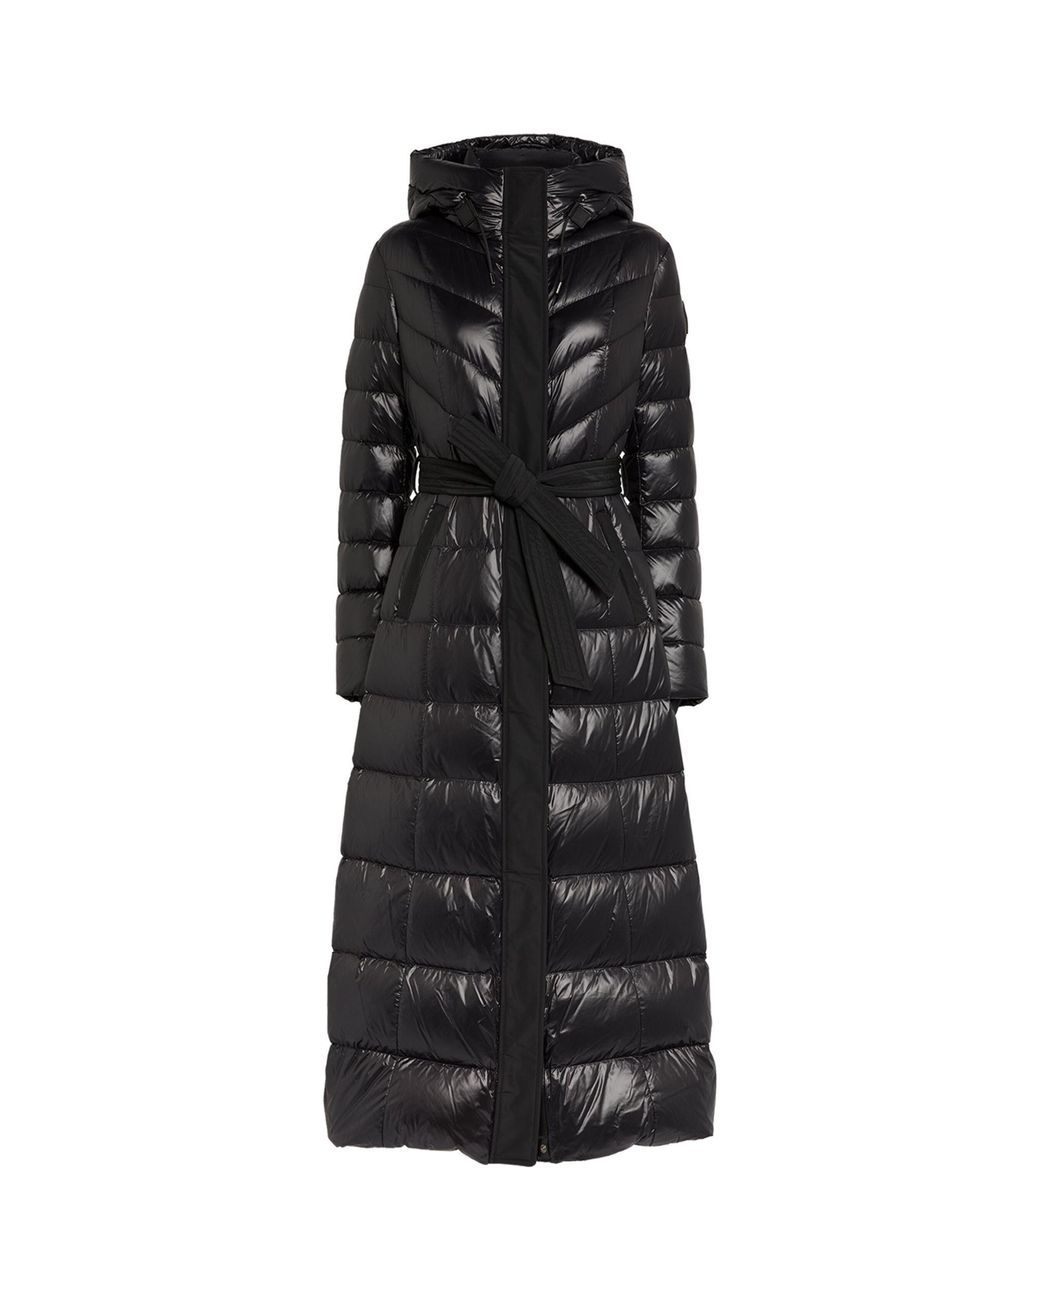 Mackage Quilted Down Calina Puffer Coat in Black | Lyst